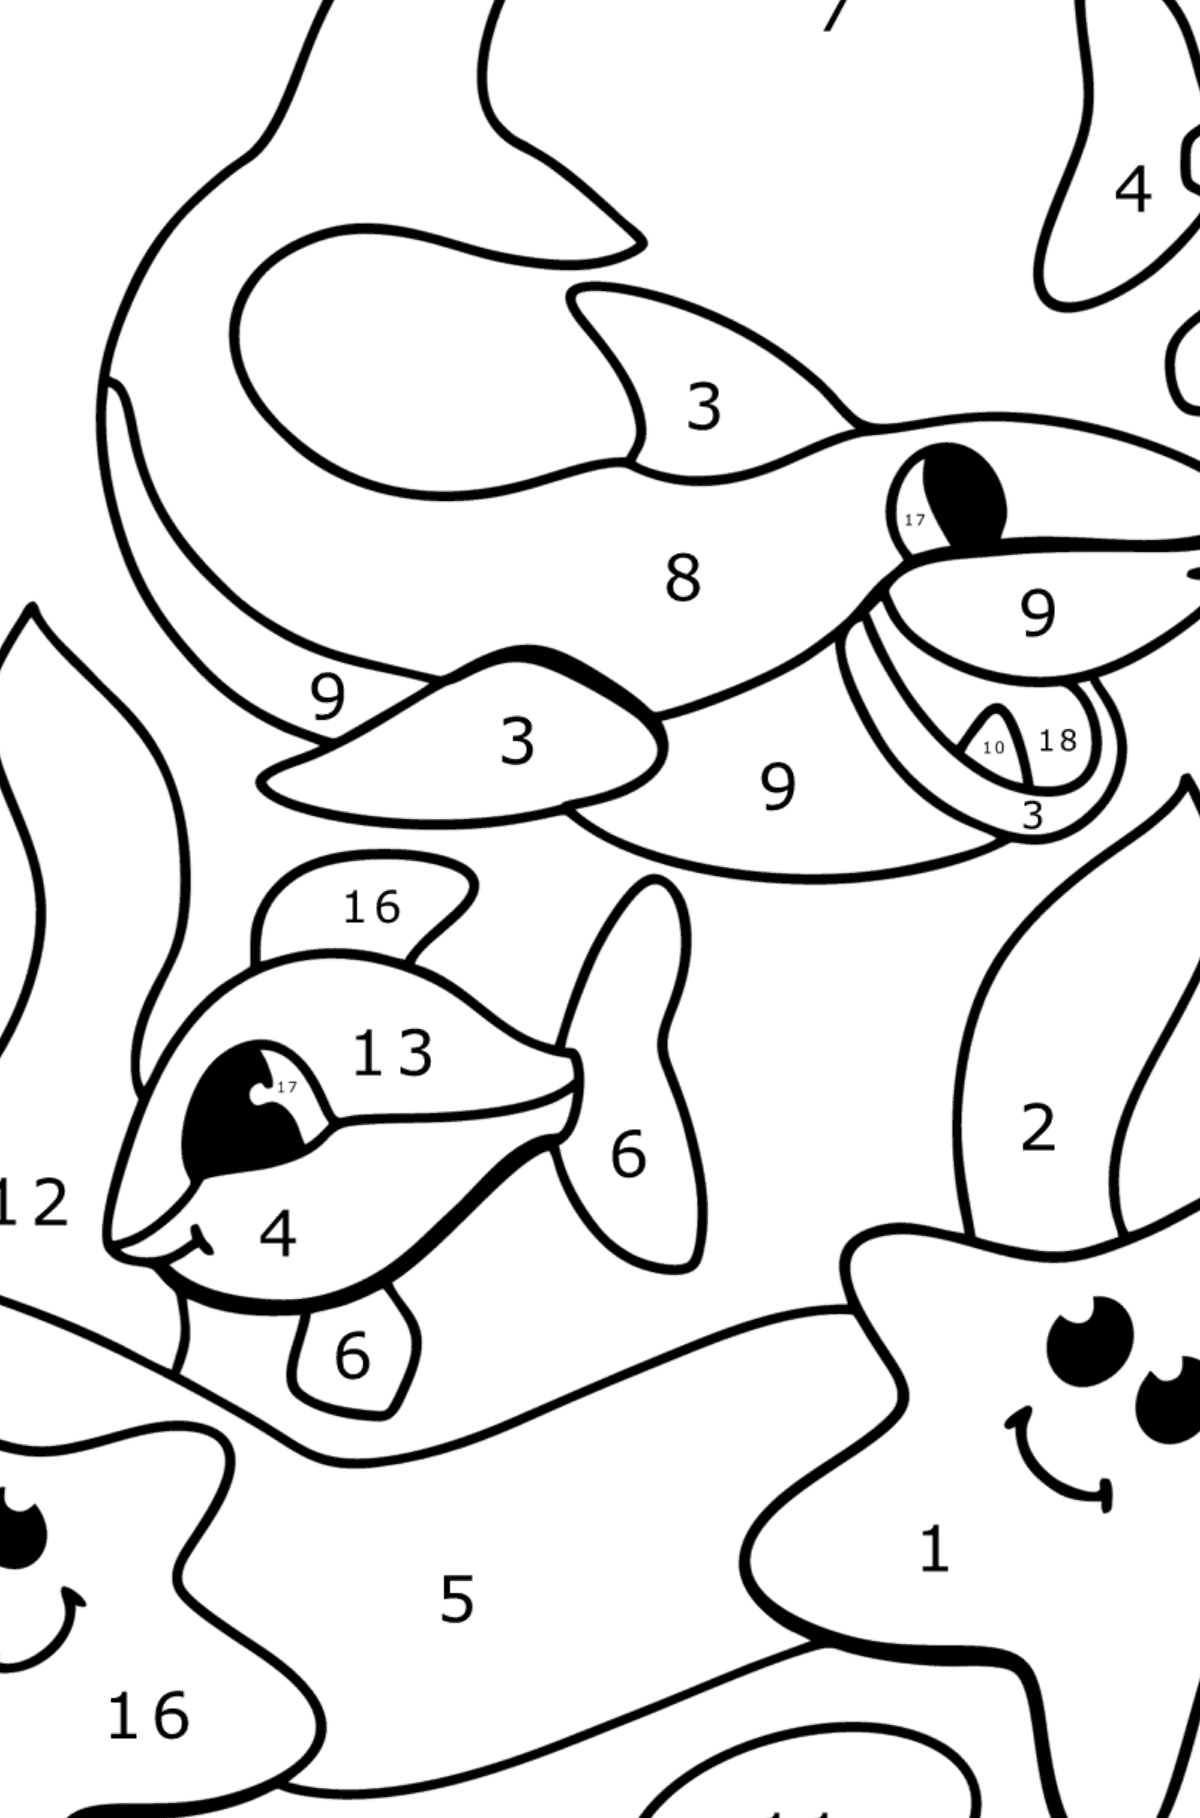 Cute shark coloring page - Coloring by Numbers for Kids